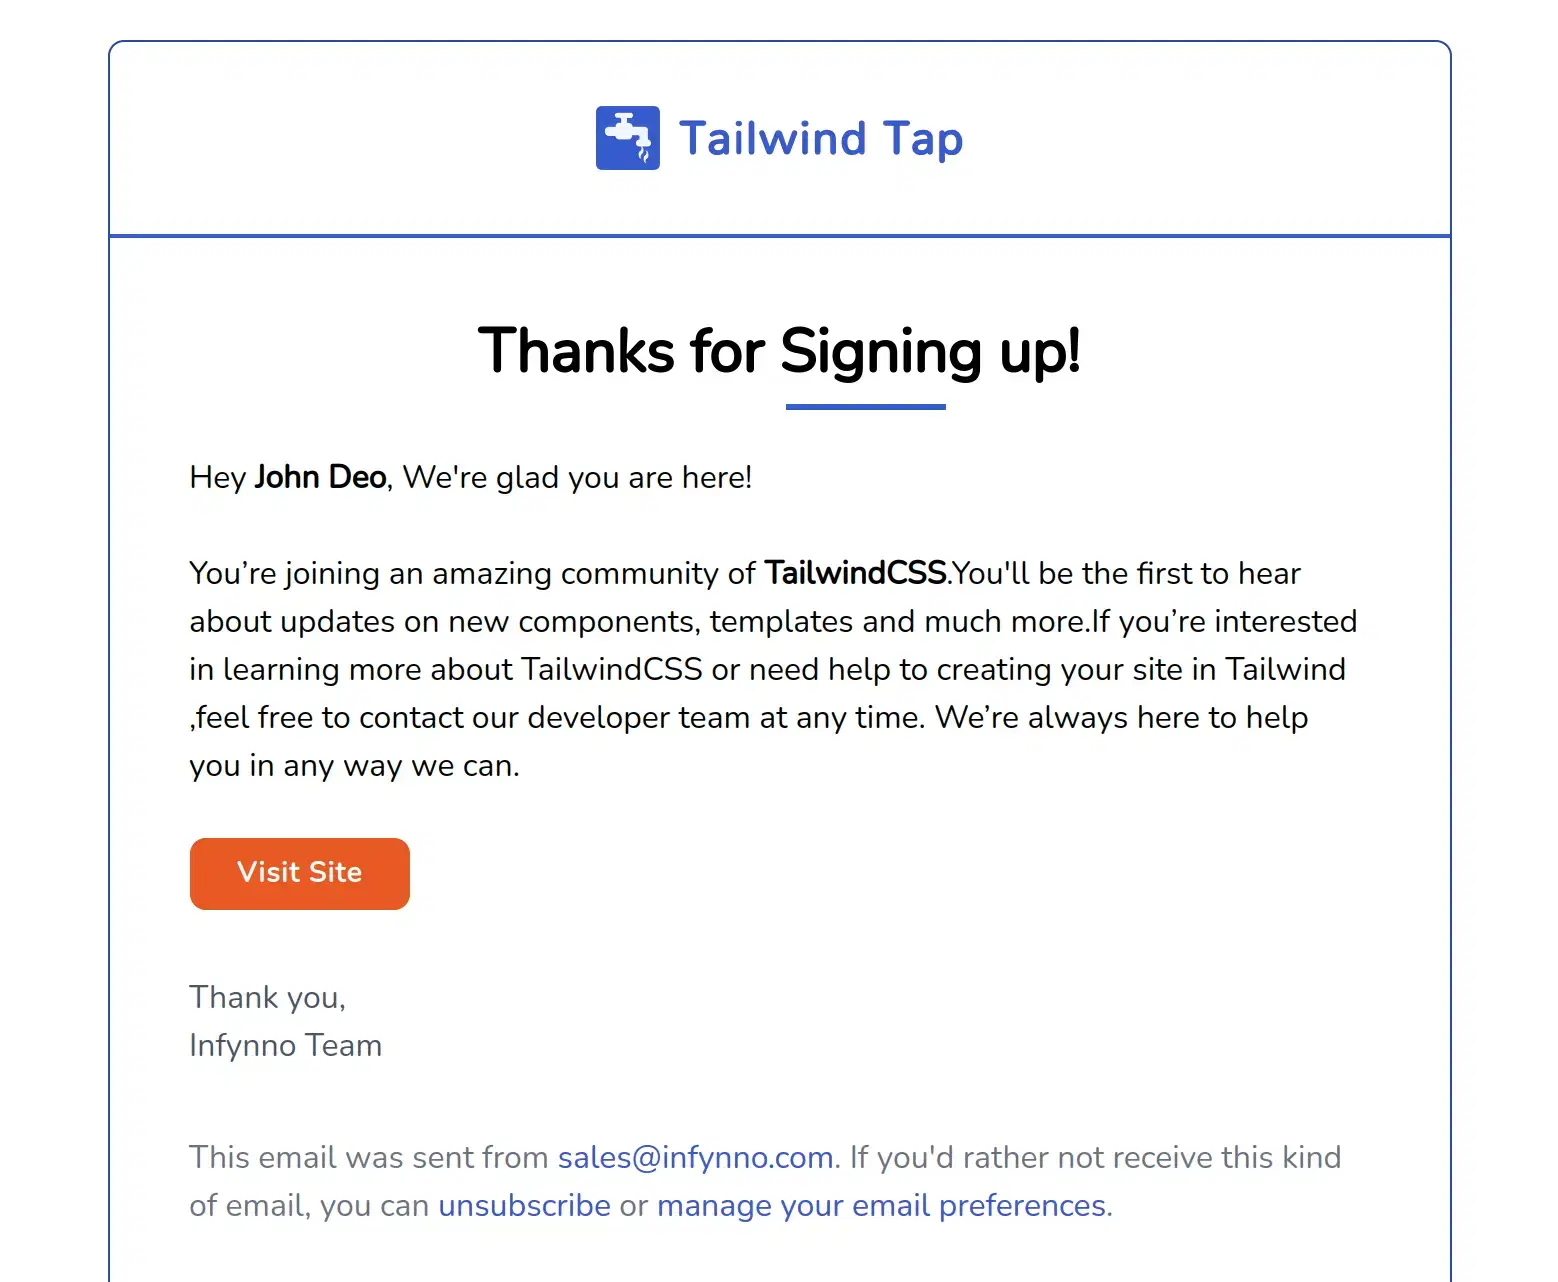 Welcome Email Tailwind CSS Templates - TailwindTap